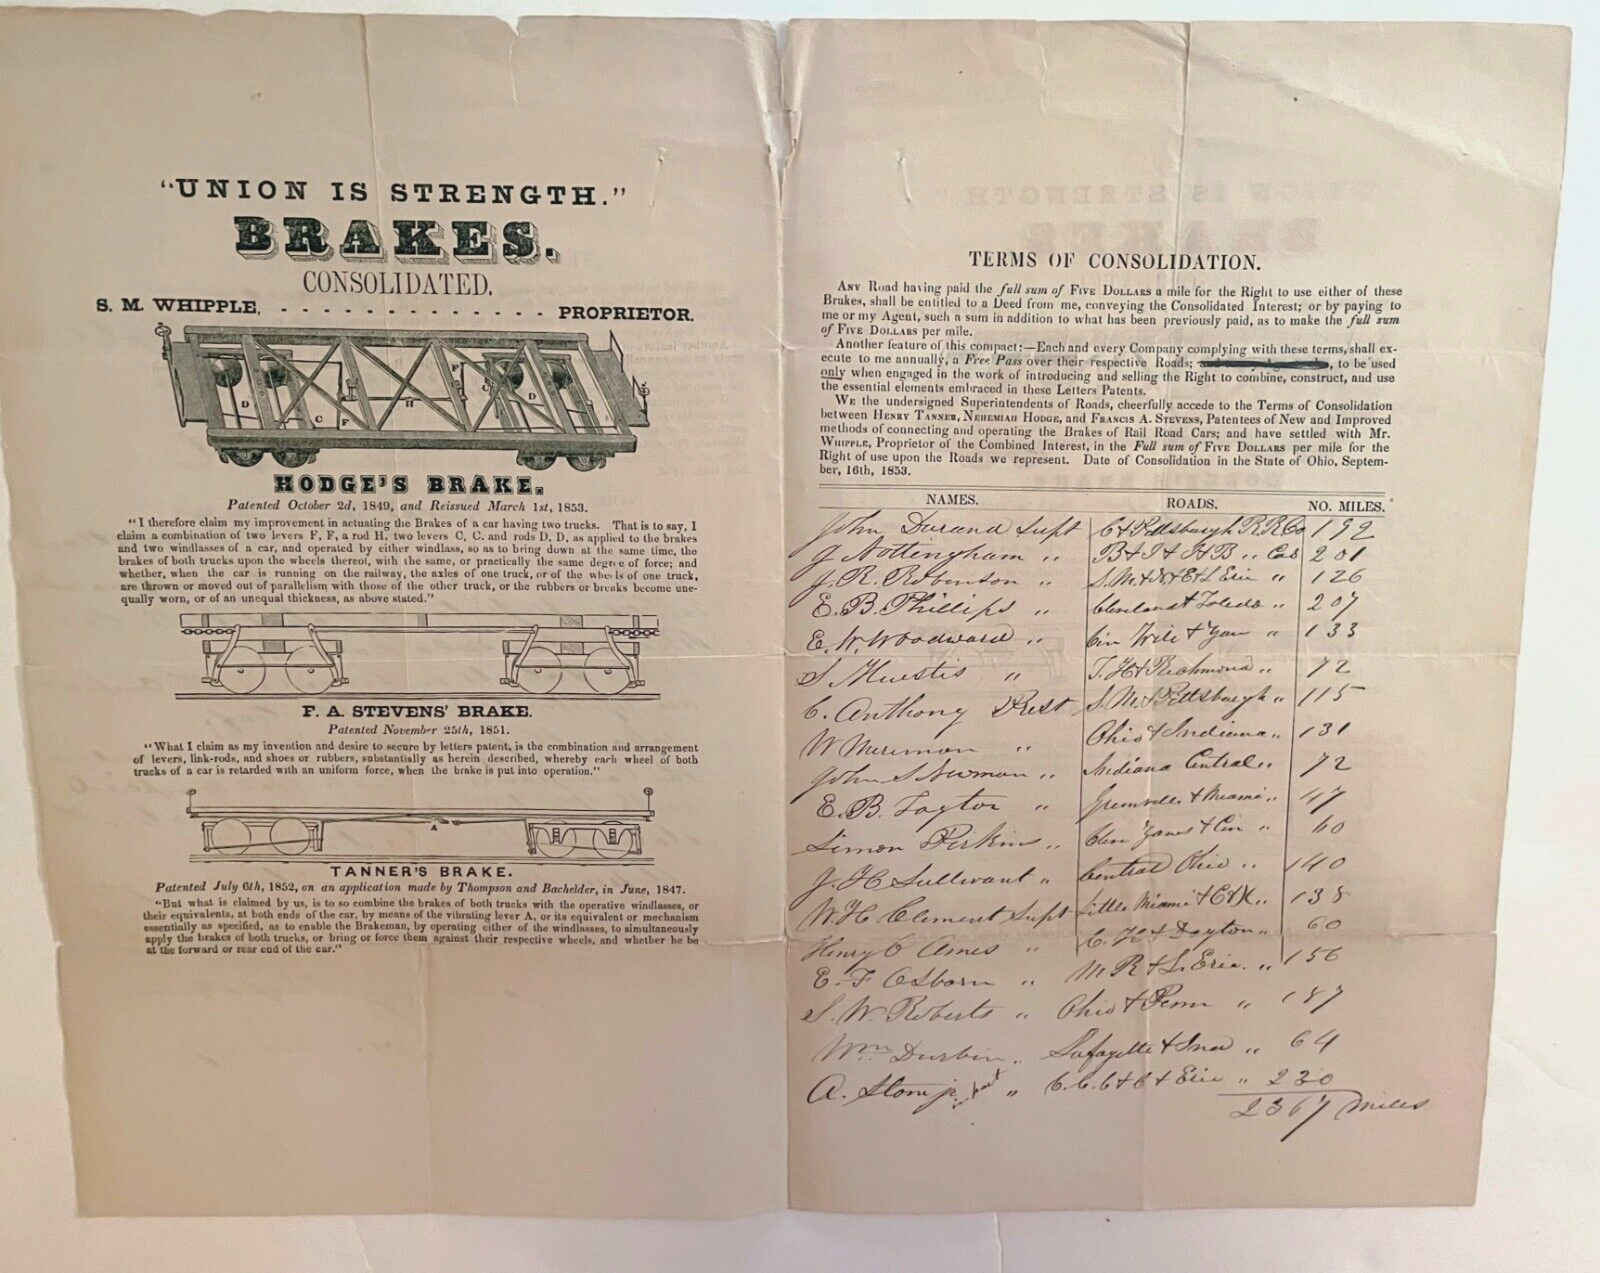 1854 Chicago IL Illustrated Document, Letter, Railroad Brakes - S M Whipple